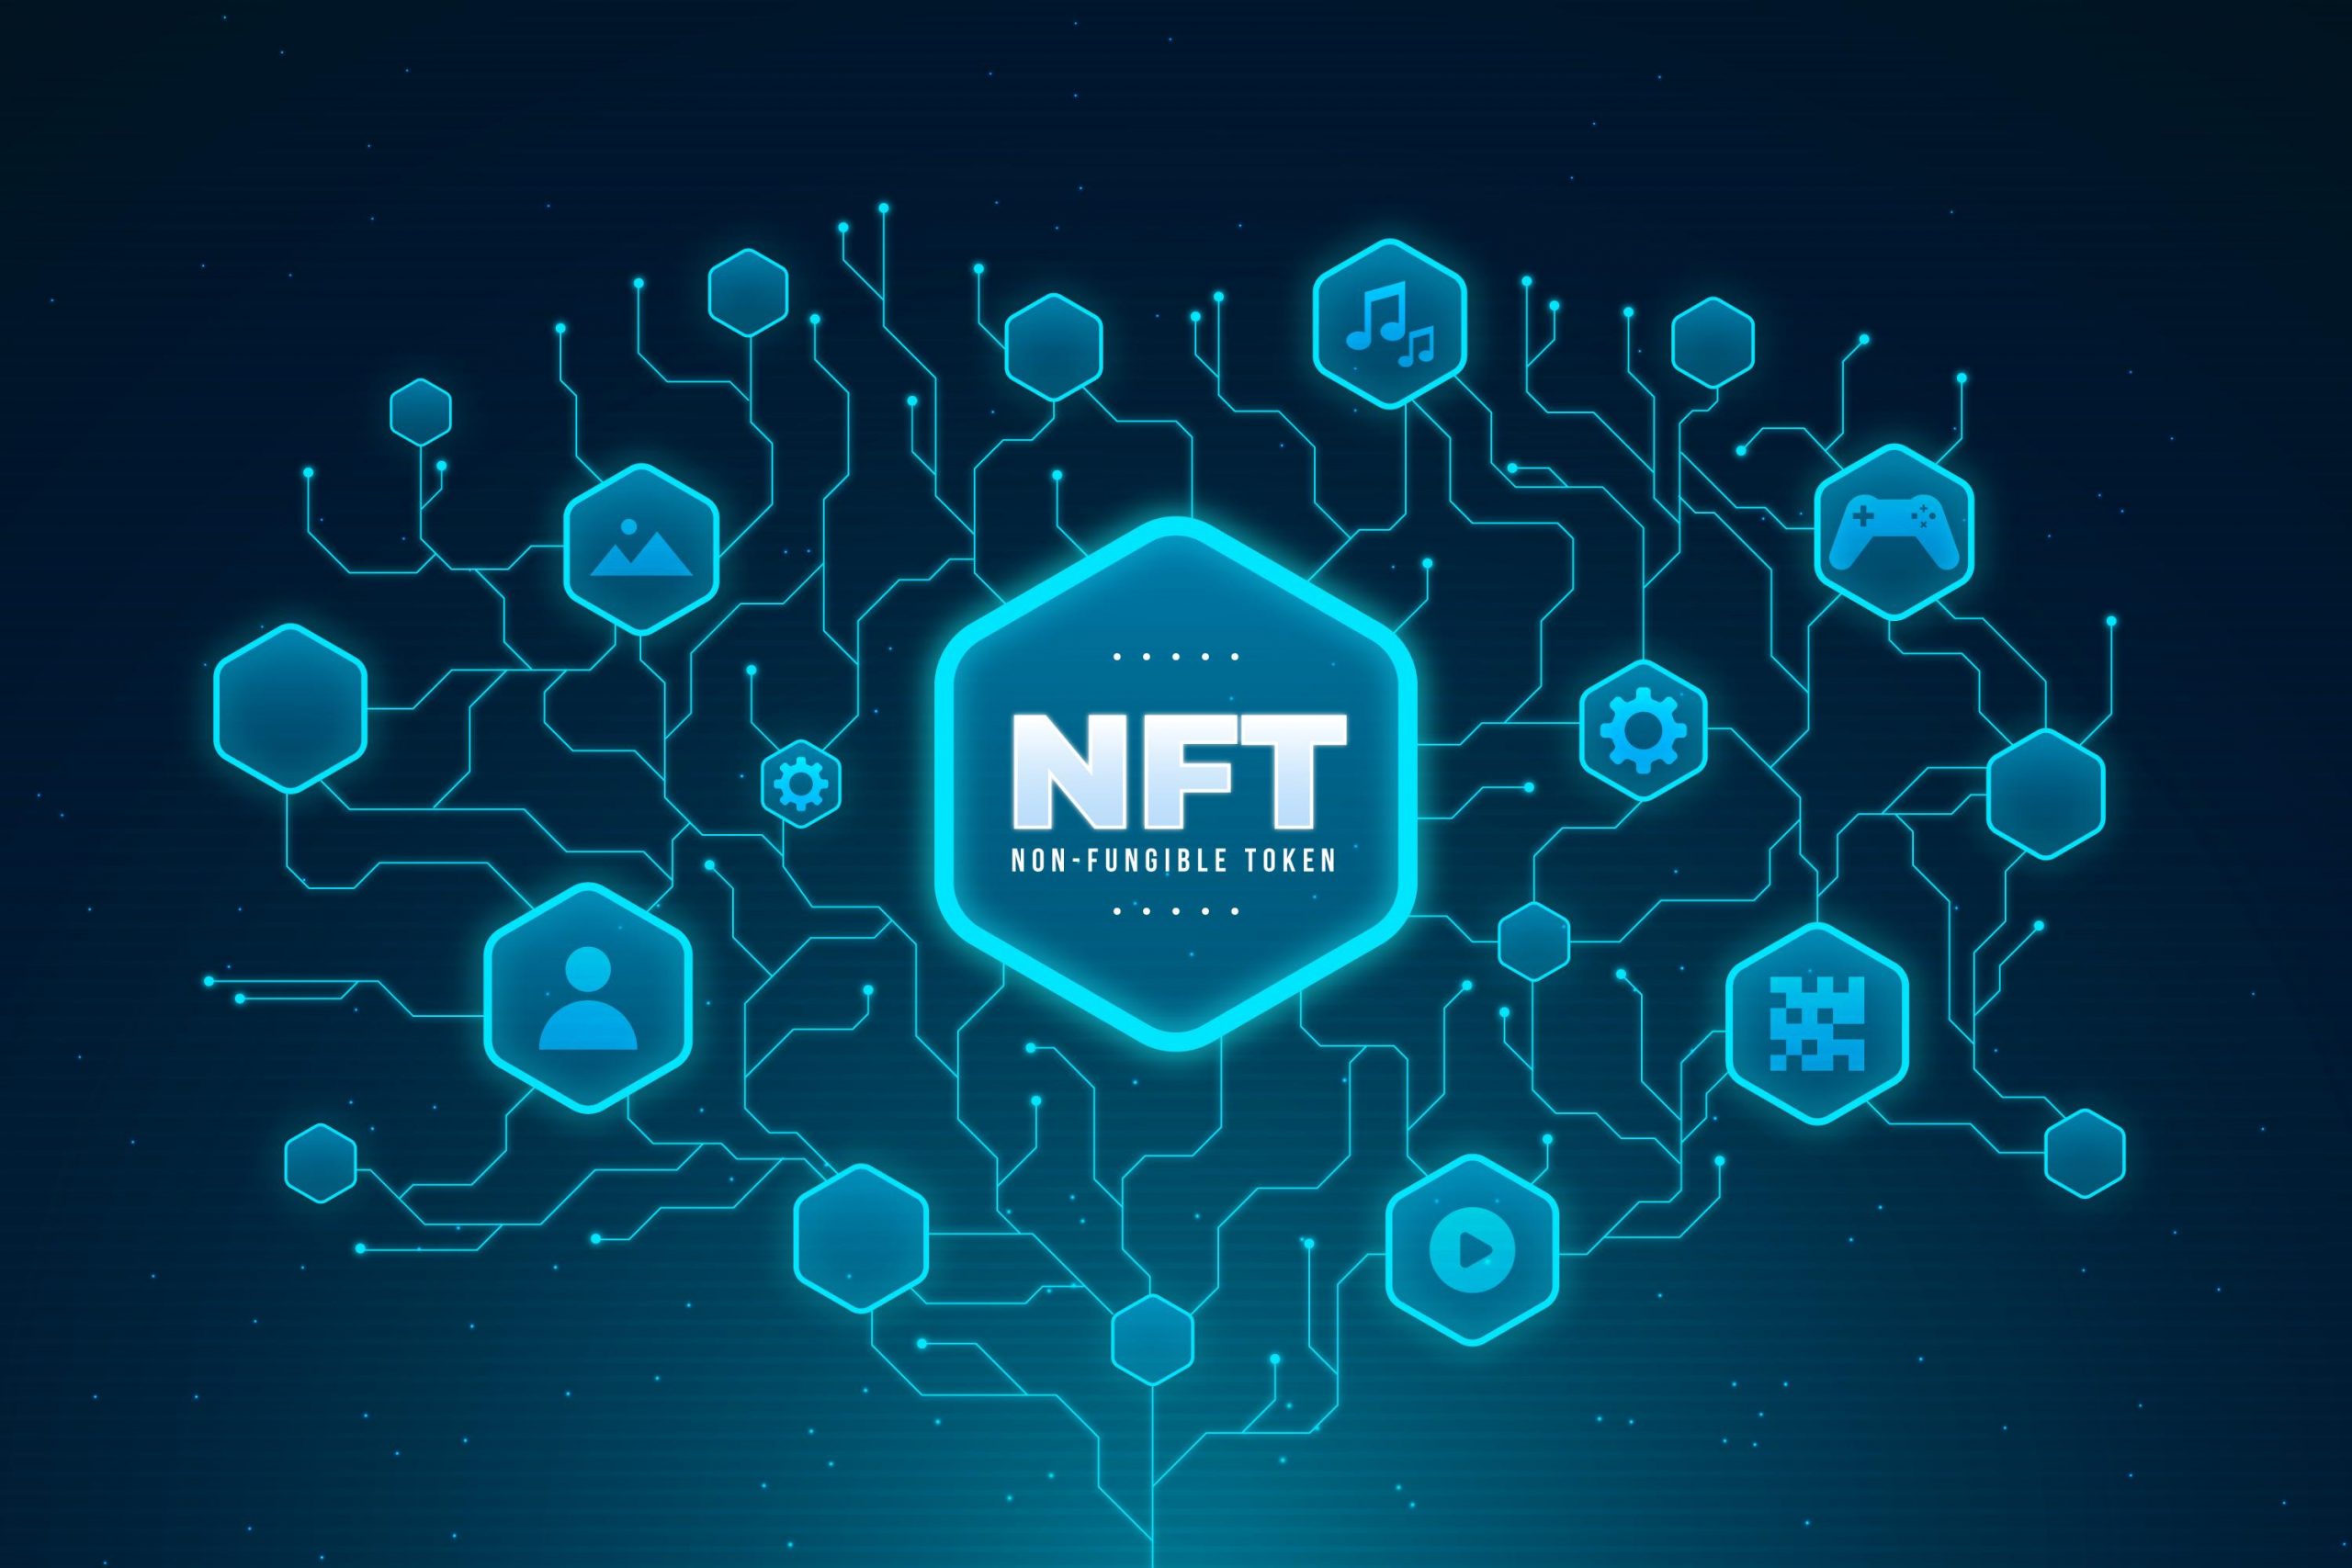 All You Need to Know About NFT (Non-Fungible Token)